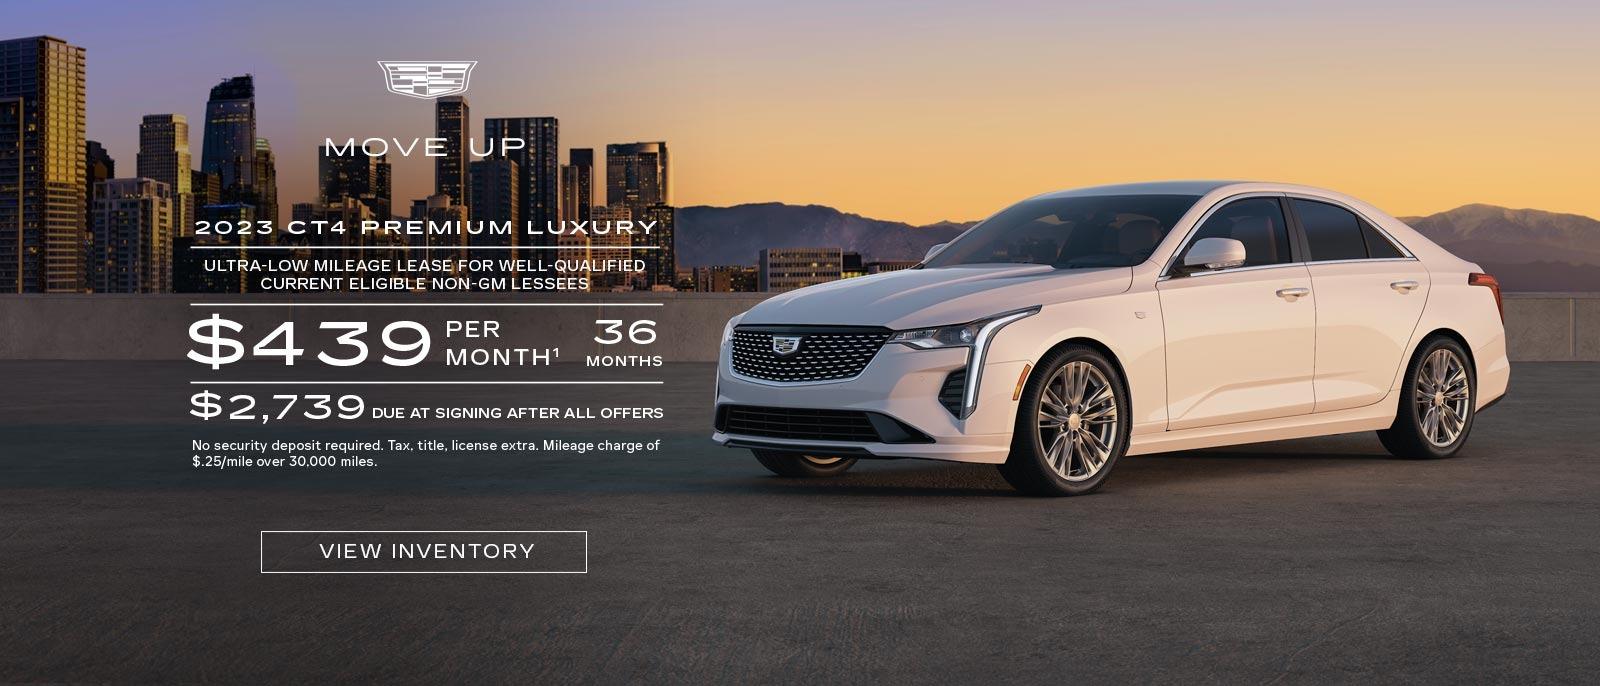 ULTRA-LOW MILEAGE LEASE FOR WELL-QUALIFIED CURRENT ELIGIBLE CADILLAC LESSEES
$439PER MONTH¹ 36 MONTHS
$2,739 DUE AT SIGNING AFTER ALL OFFERS
No security deposit required. Tax, title, license extra. Mileage charge of $.25/mile over 30,000 miles.